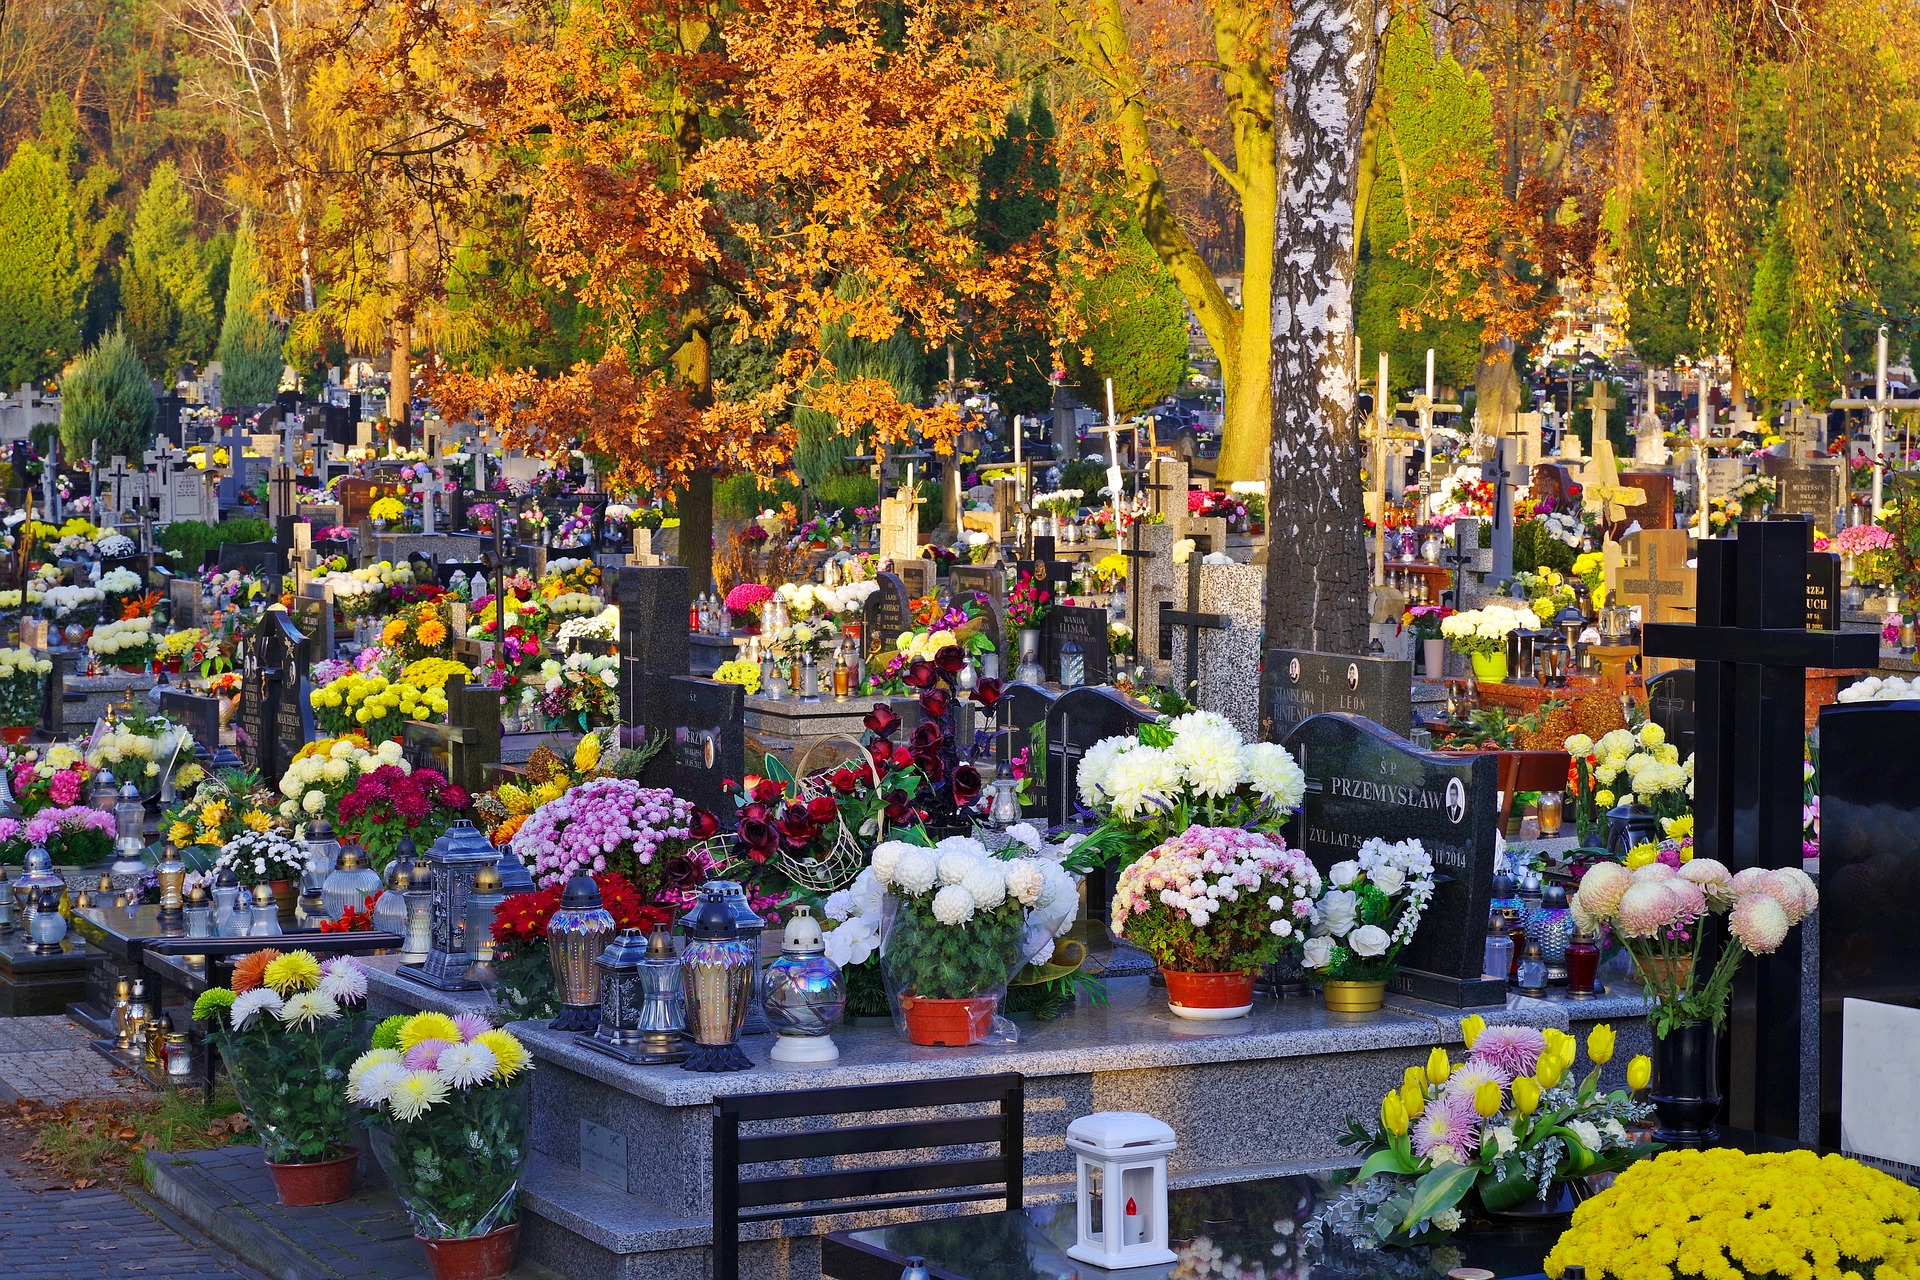 What is All Saints’ Day? What is its origin?